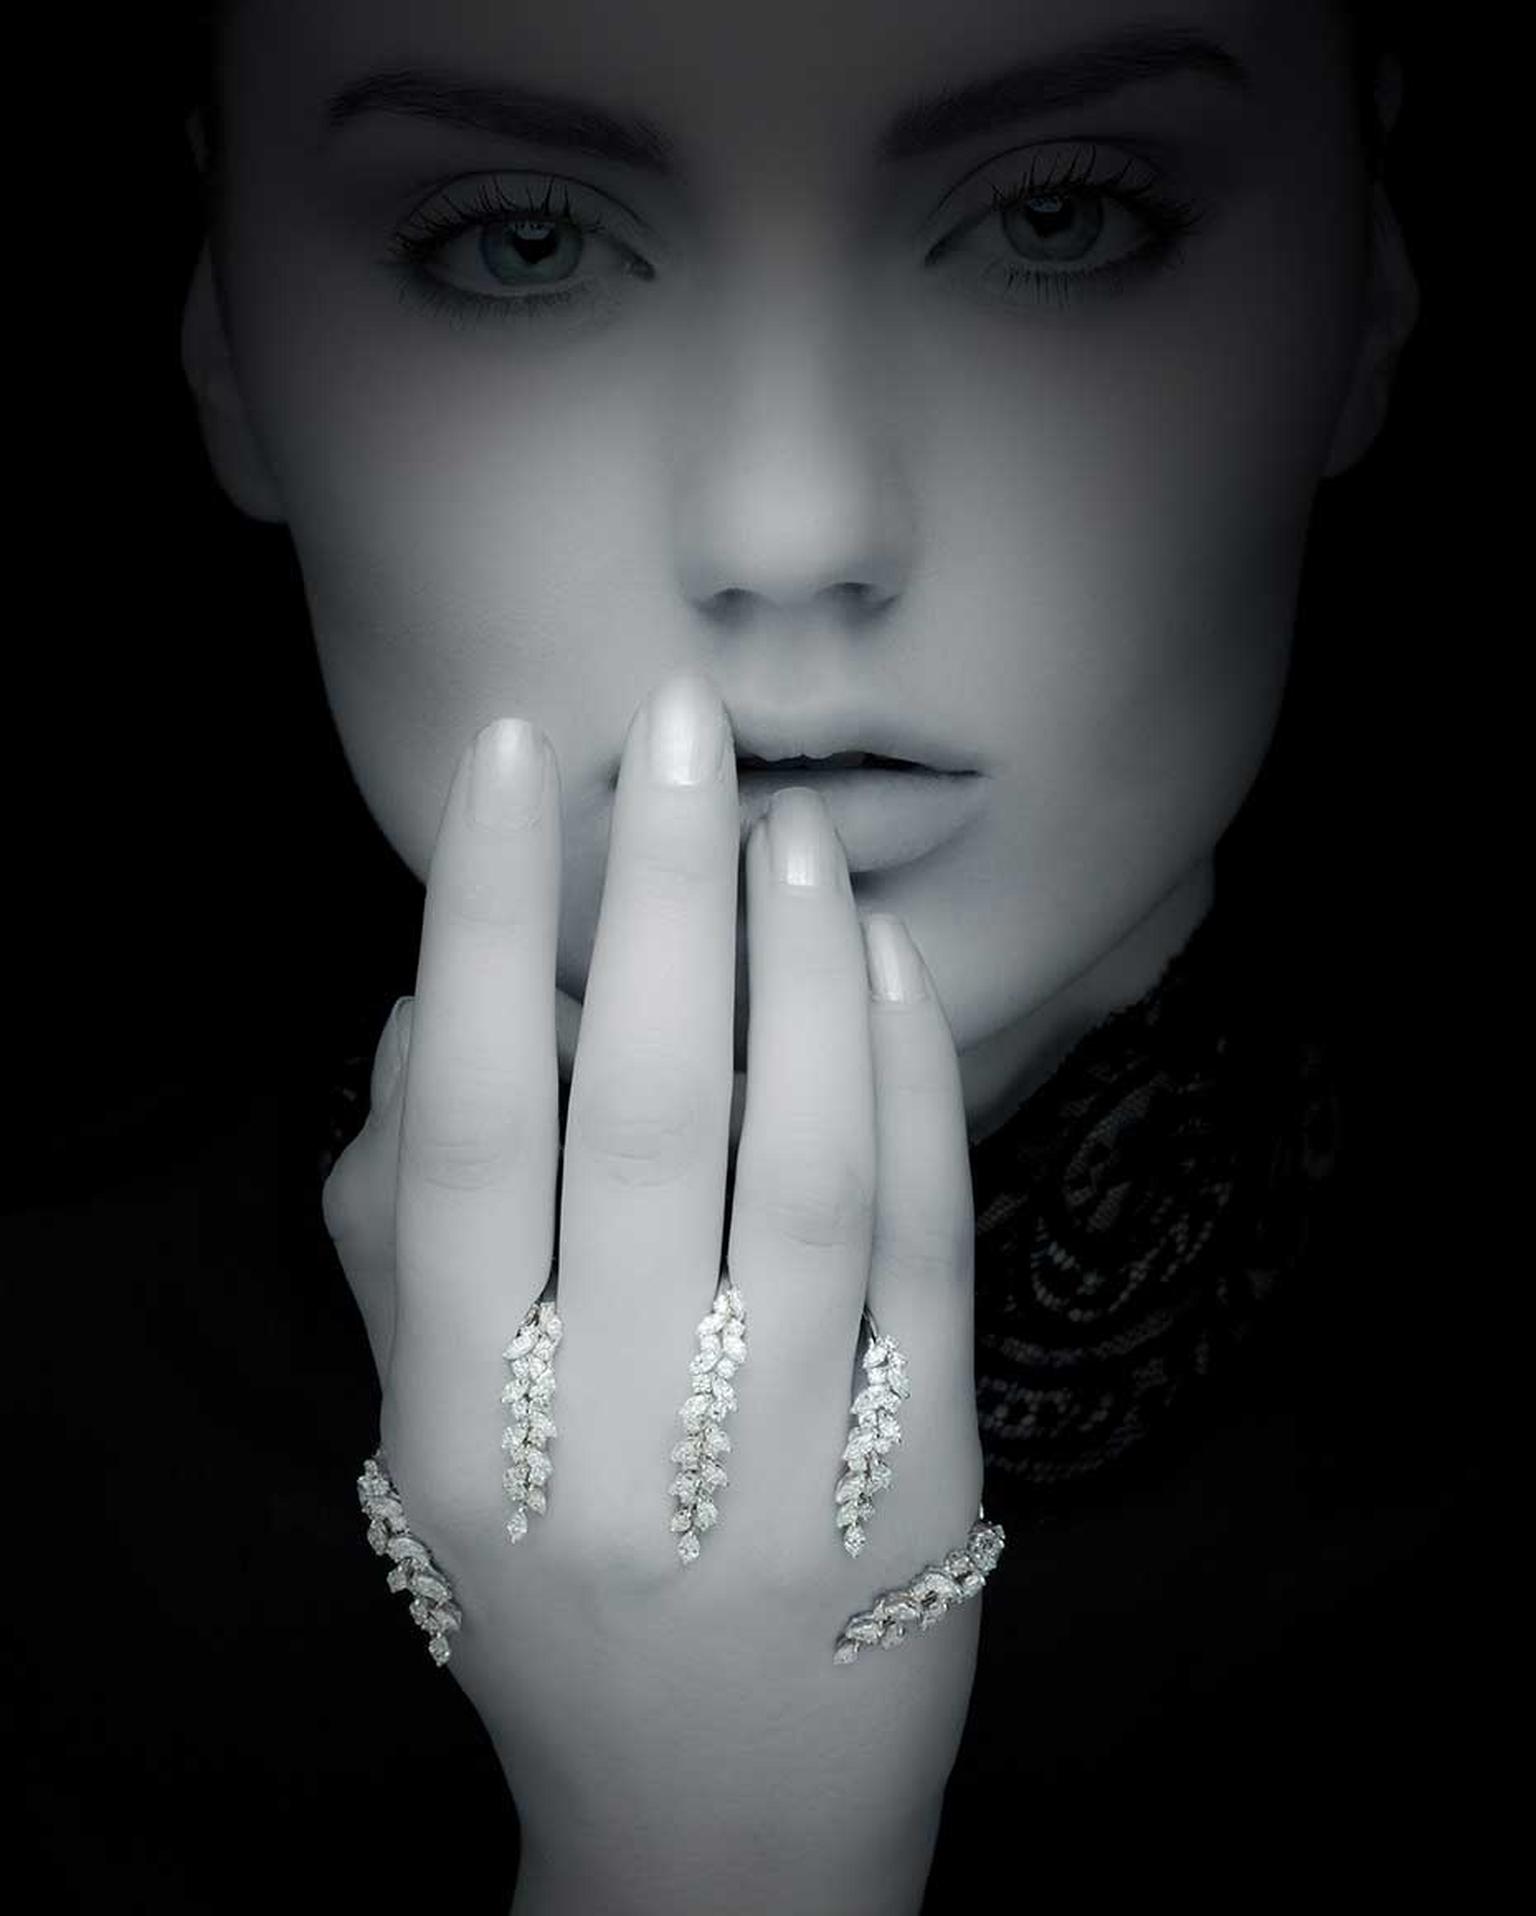 Yeprem will be debuting its unique diamond hand jewels at the 2014 Couture Show Las Vegas